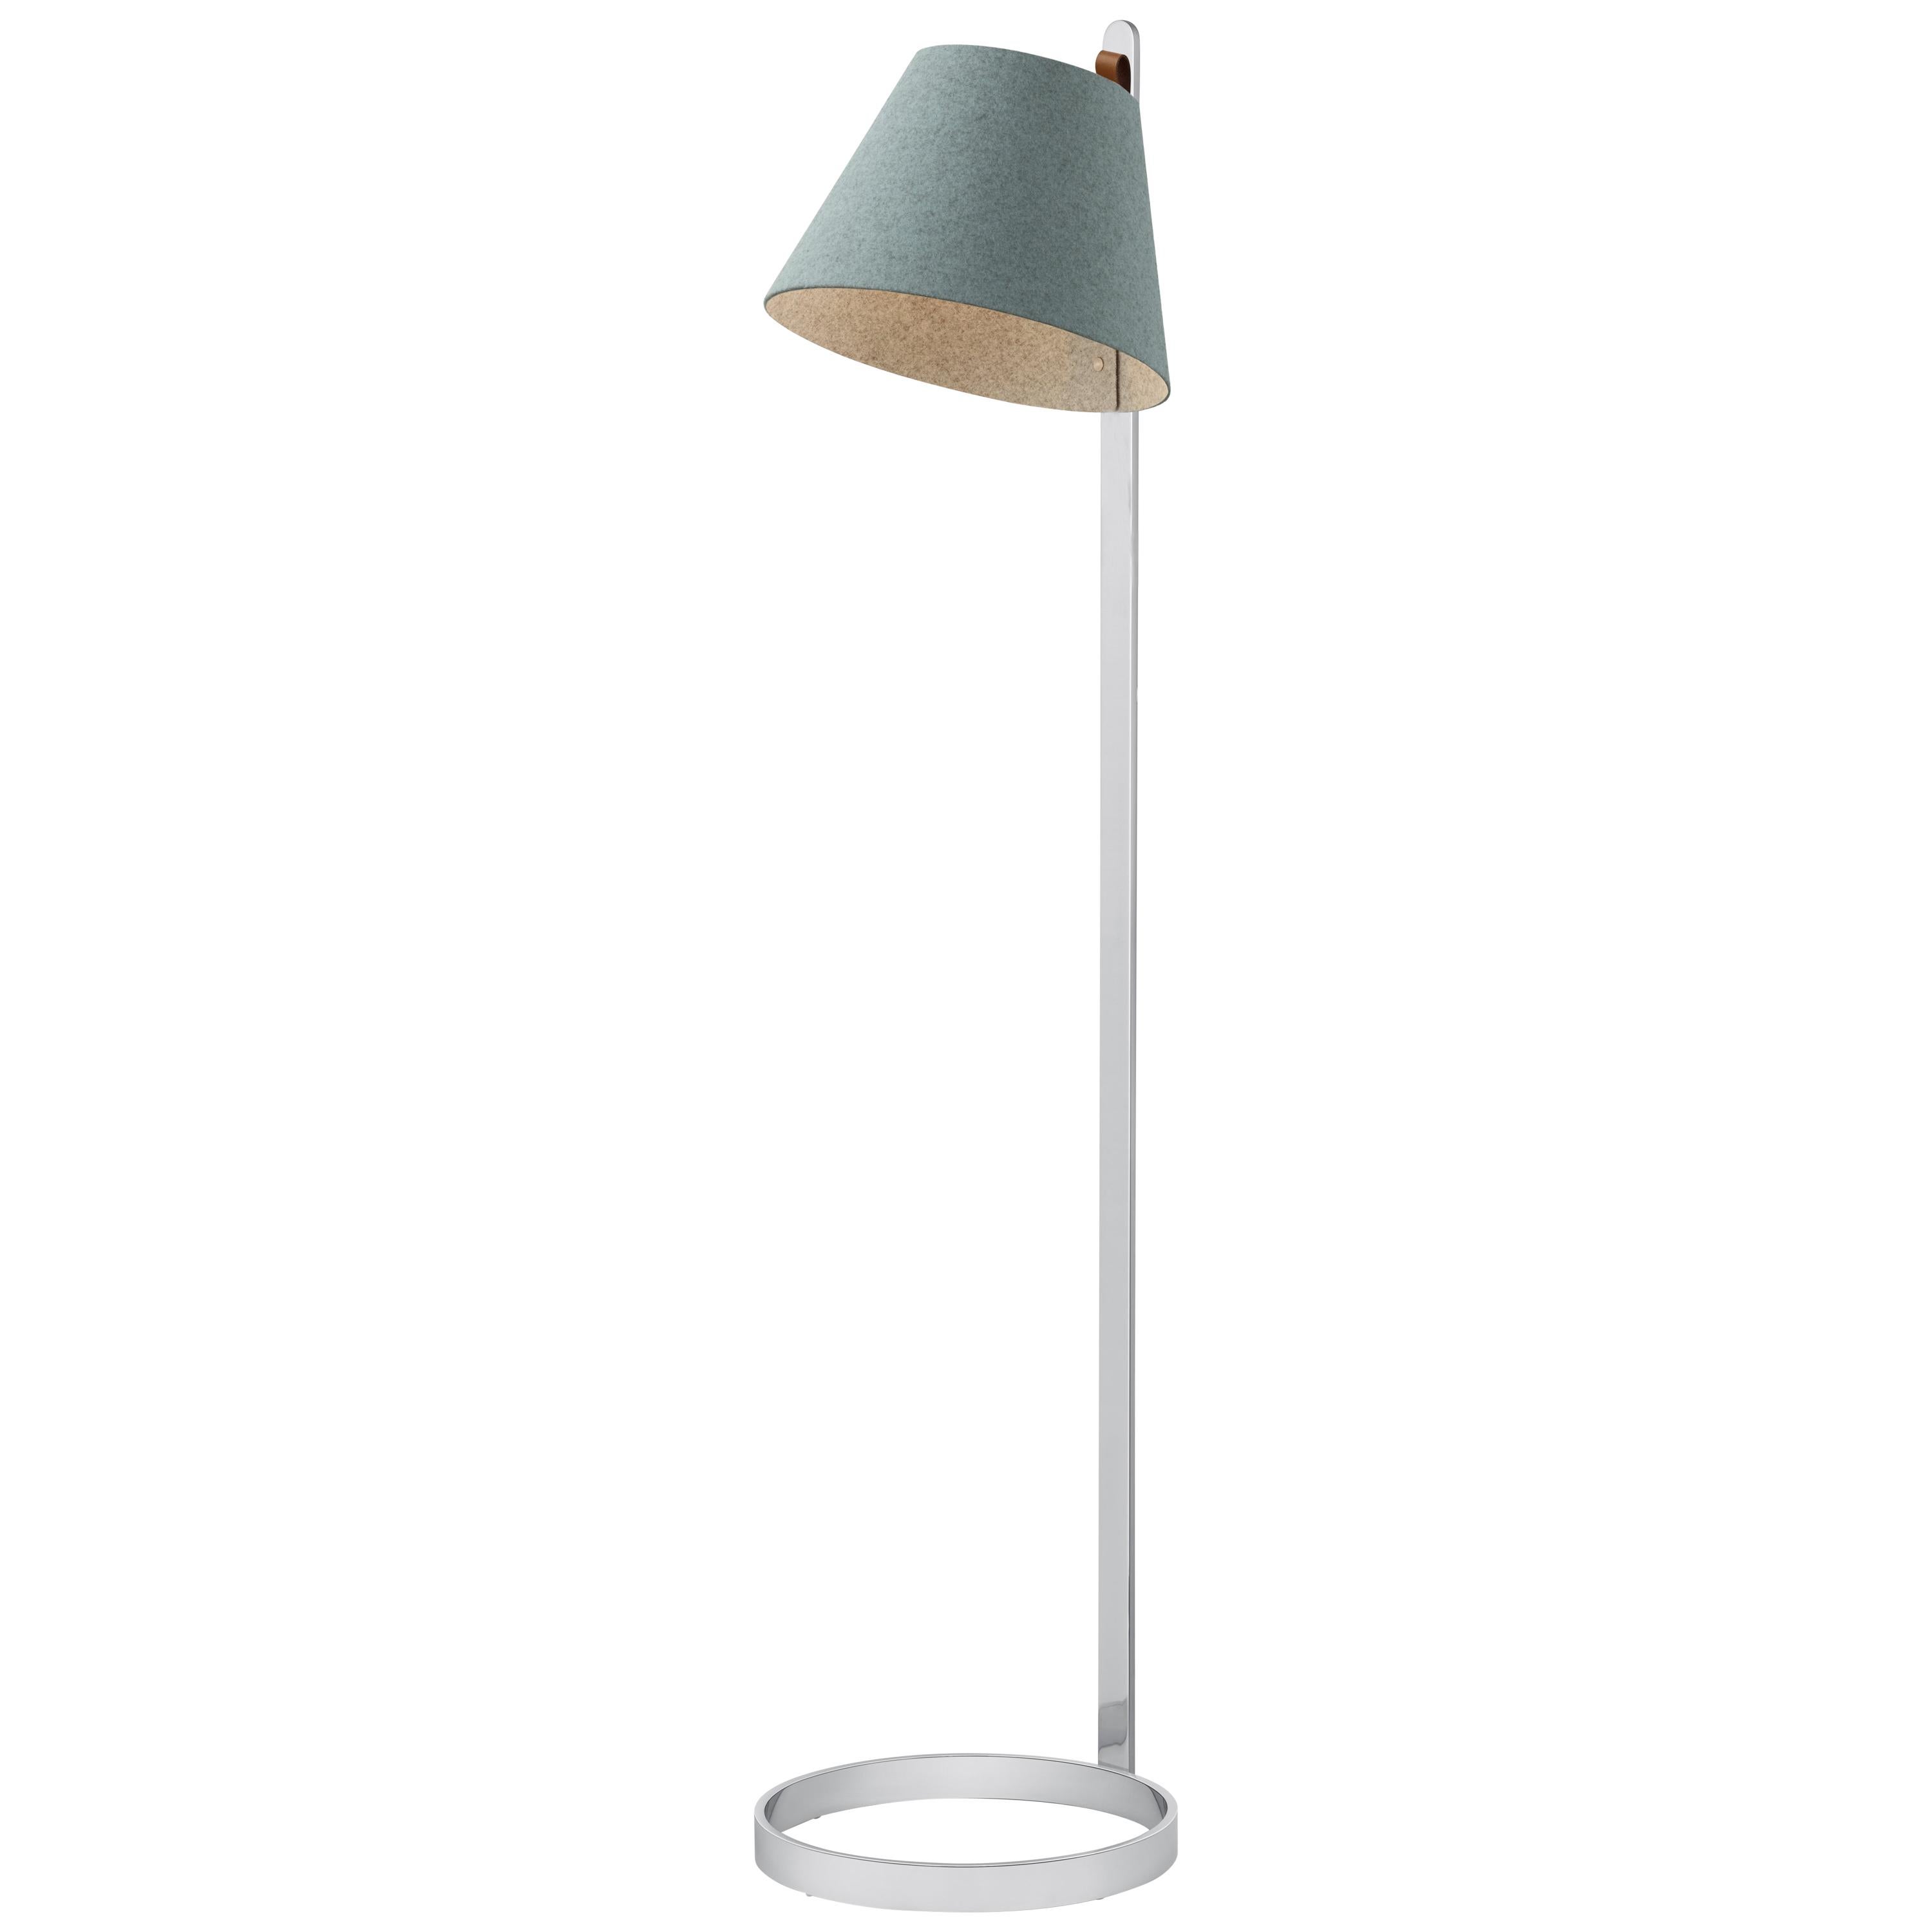 Lana Floor Lamp in Arctic Blue & Grey with Chrome Base by Pablo Designs